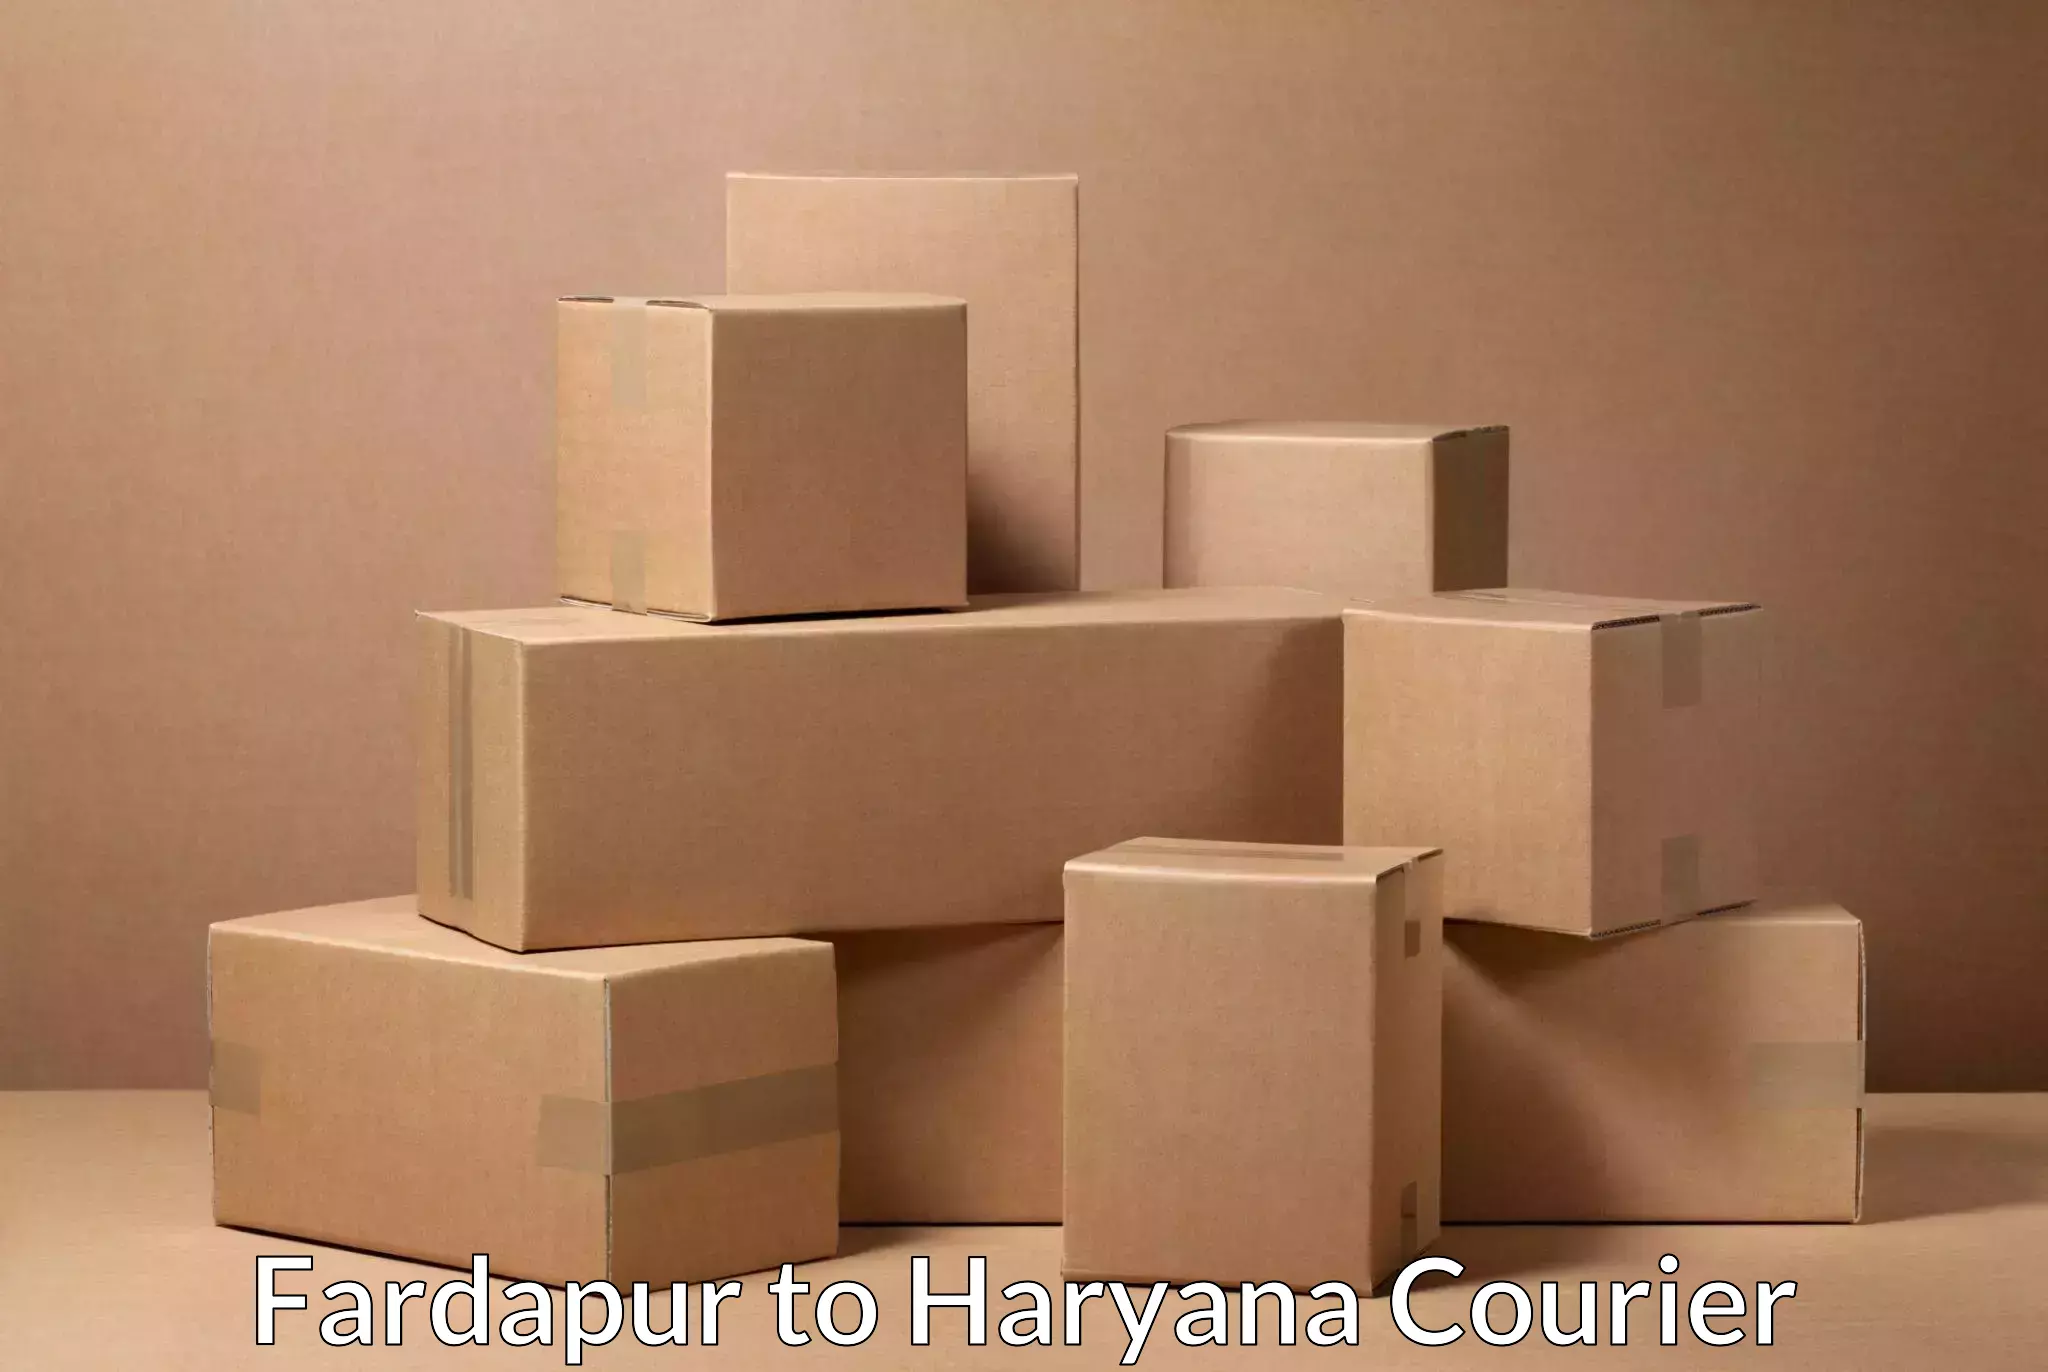 Affordable parcel service Fardapur to Haryana